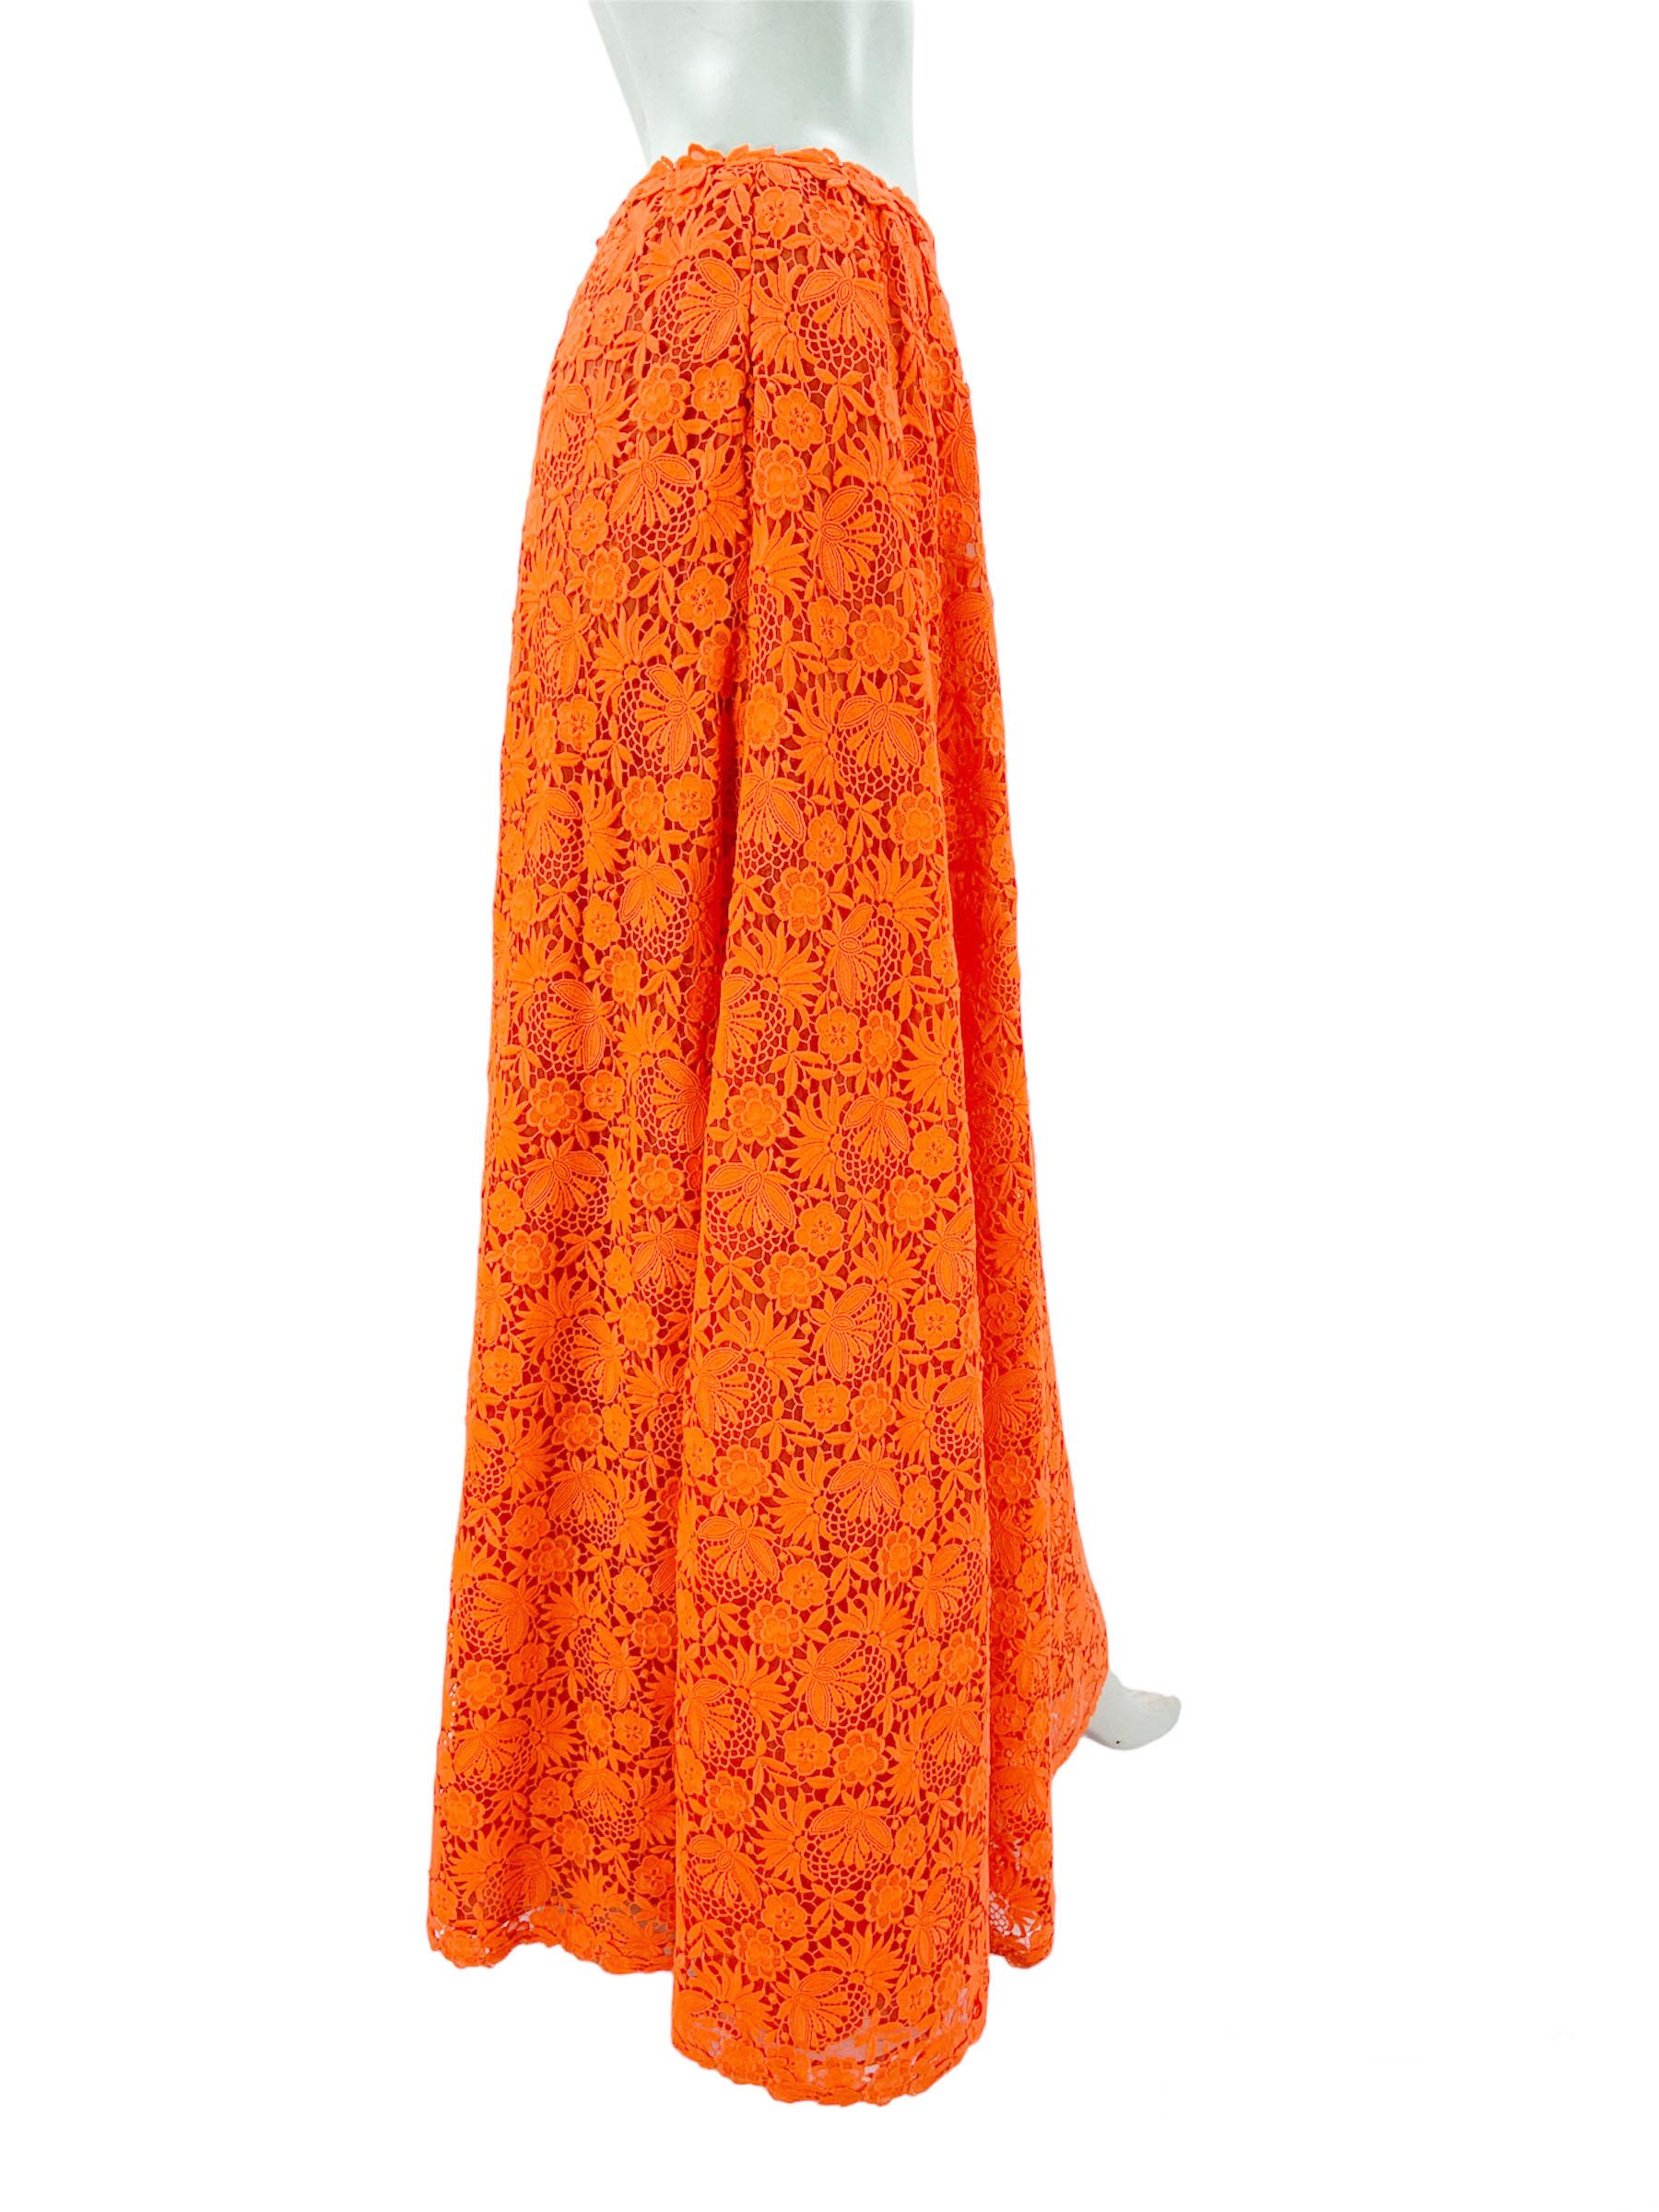 Valentino Lace Maxi Skirt
Italian size - 40
Neon orange color, Floral lace, Side pockets, Double lined - in organza and silk, A-line style.
Measurements: Length - 41 inch, Waist - 27.5